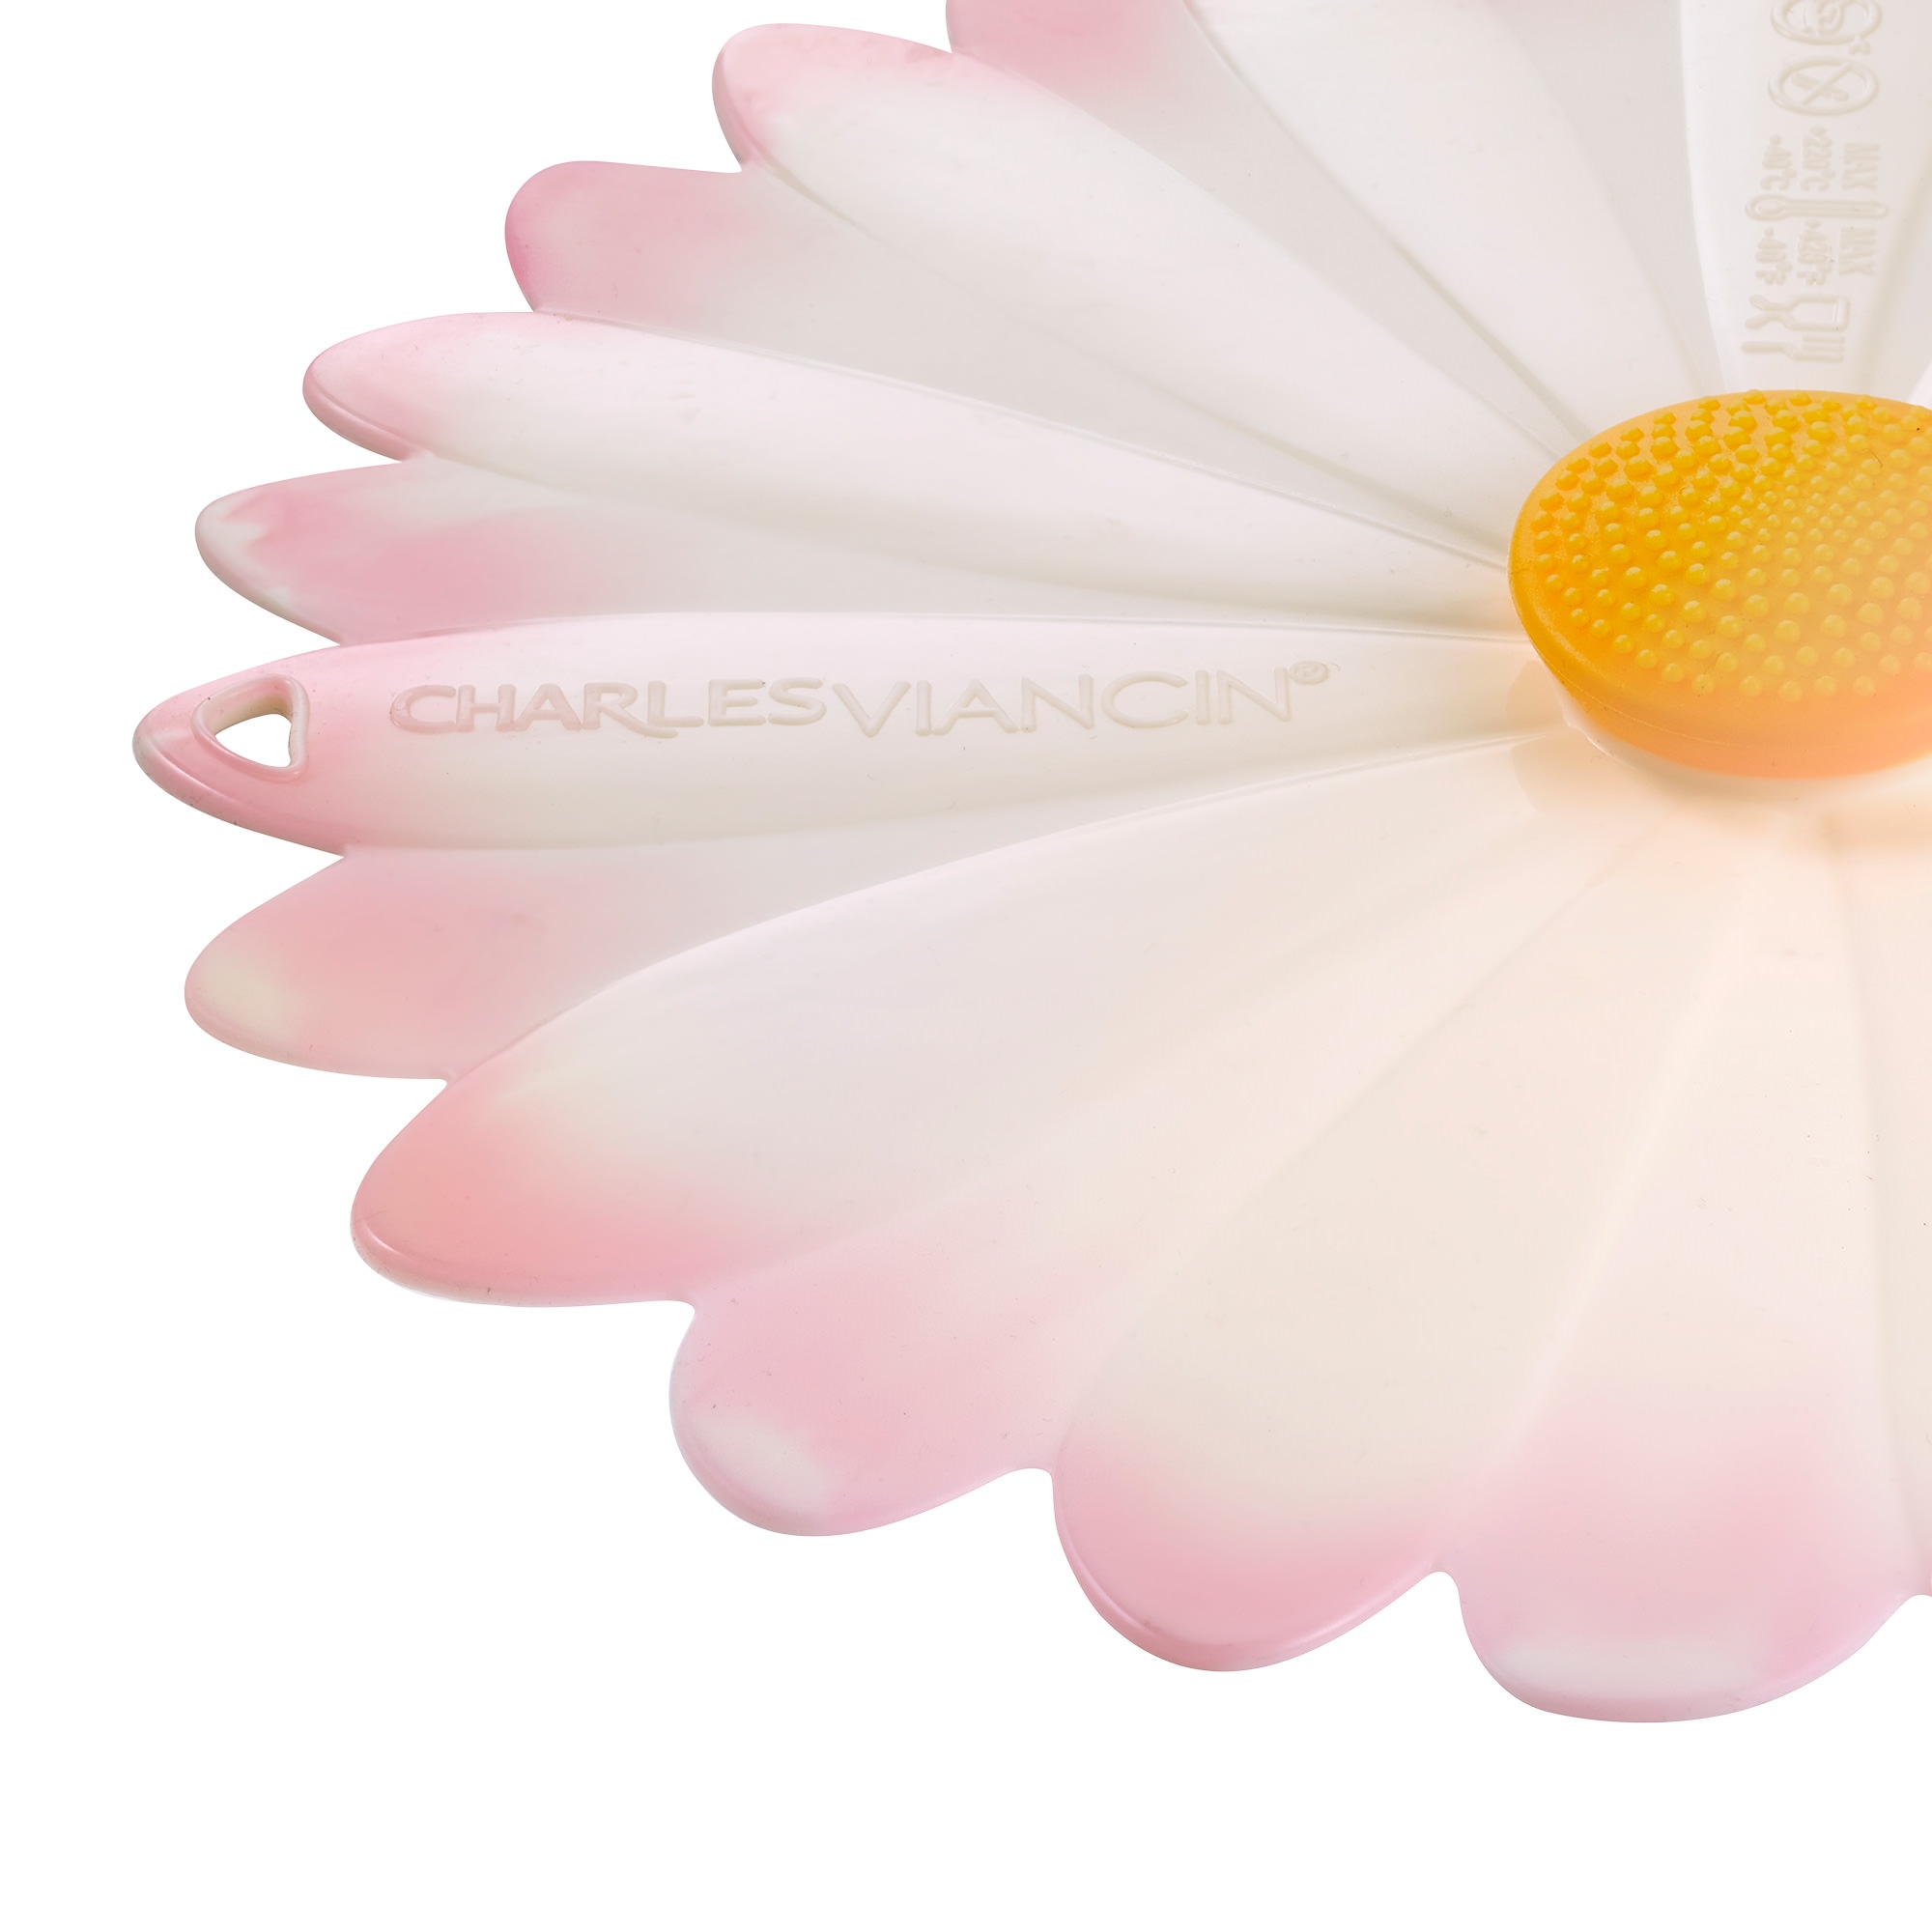 Charles Viancin Daisy Silicone Lid 23cm White Image 2